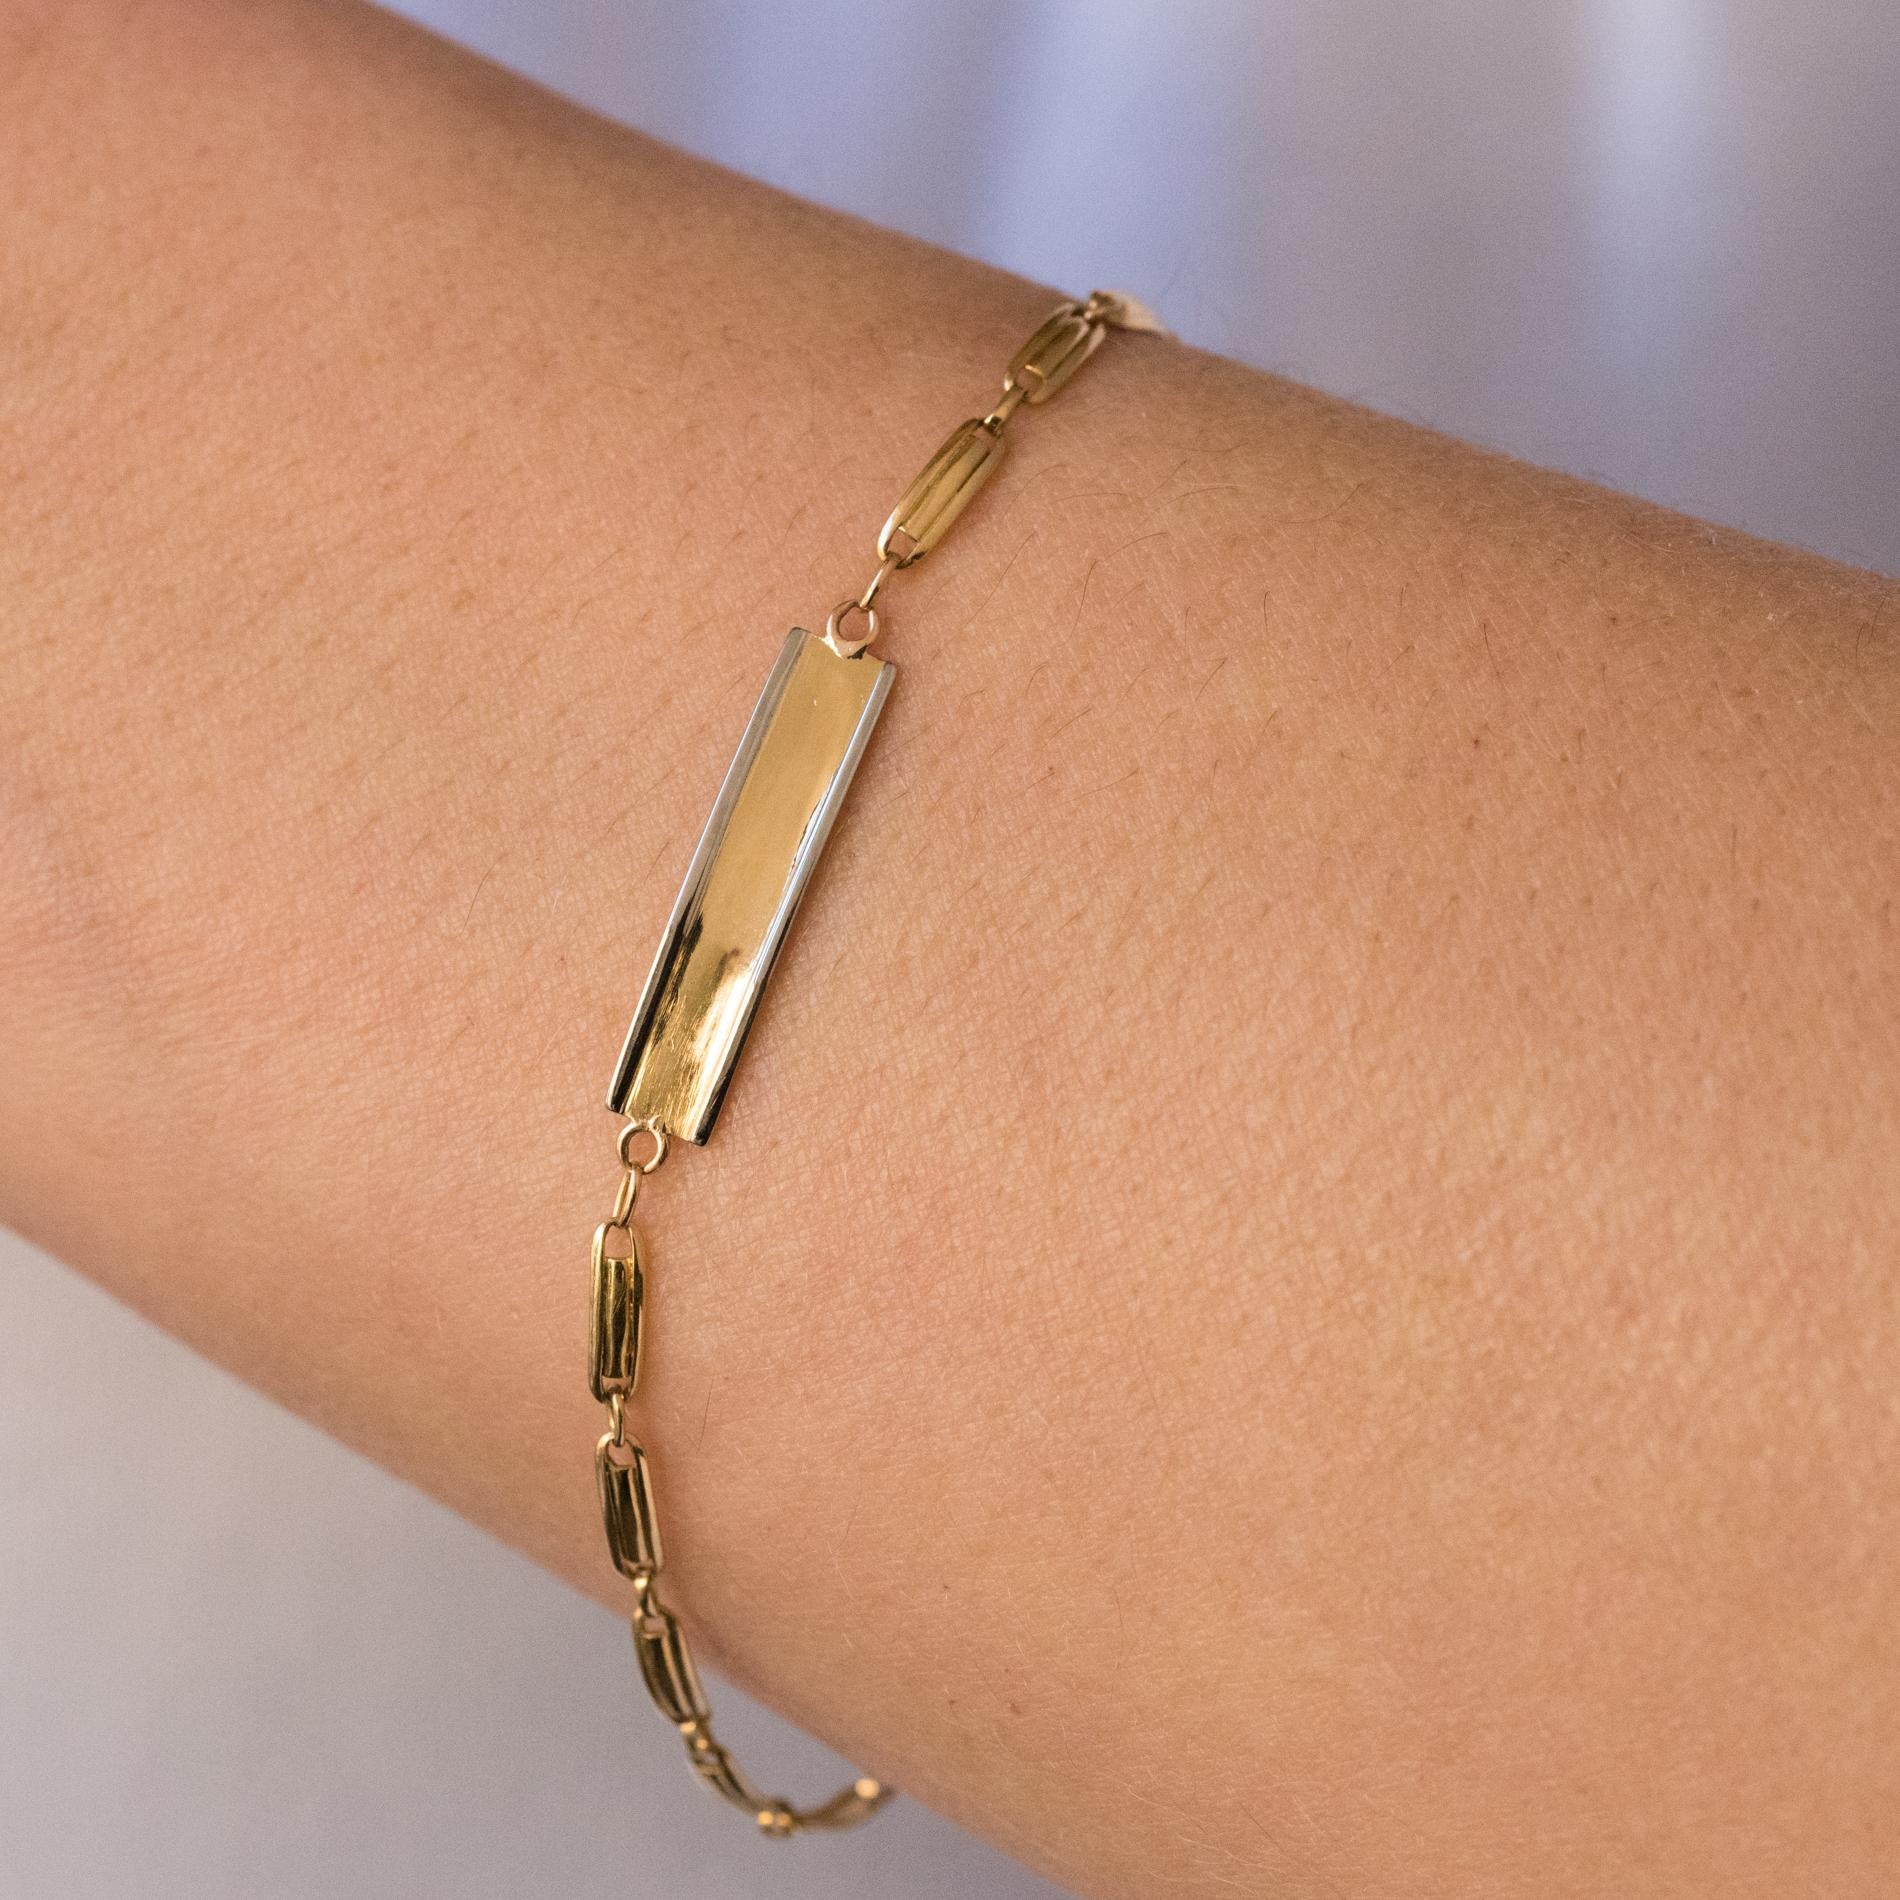 Bracelet in 18 karats yellow gold, eagle's head hallmark.
Lovely little antique bracelet, it is formed of a mesh made of gold staples holding a small yellow gold plate edged with white gold. The clasp is a spring ring.
Total length: 17 cm, width: